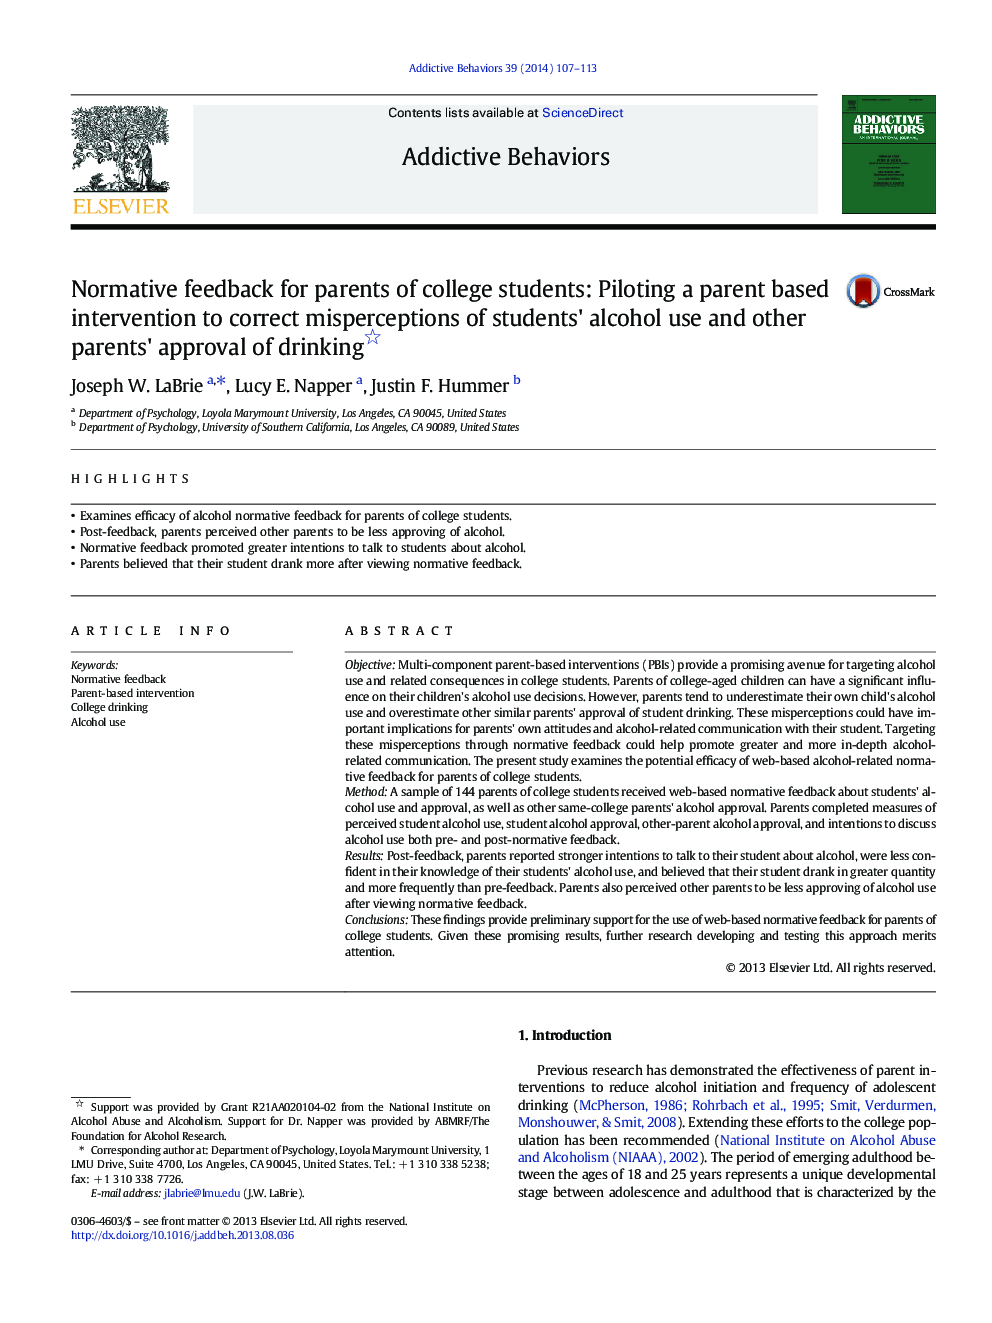 Normative feedback for parents of college students: Piloting a parent based intervention to correct misperceptions of students' alcohol use and other parents' approval of drinking 